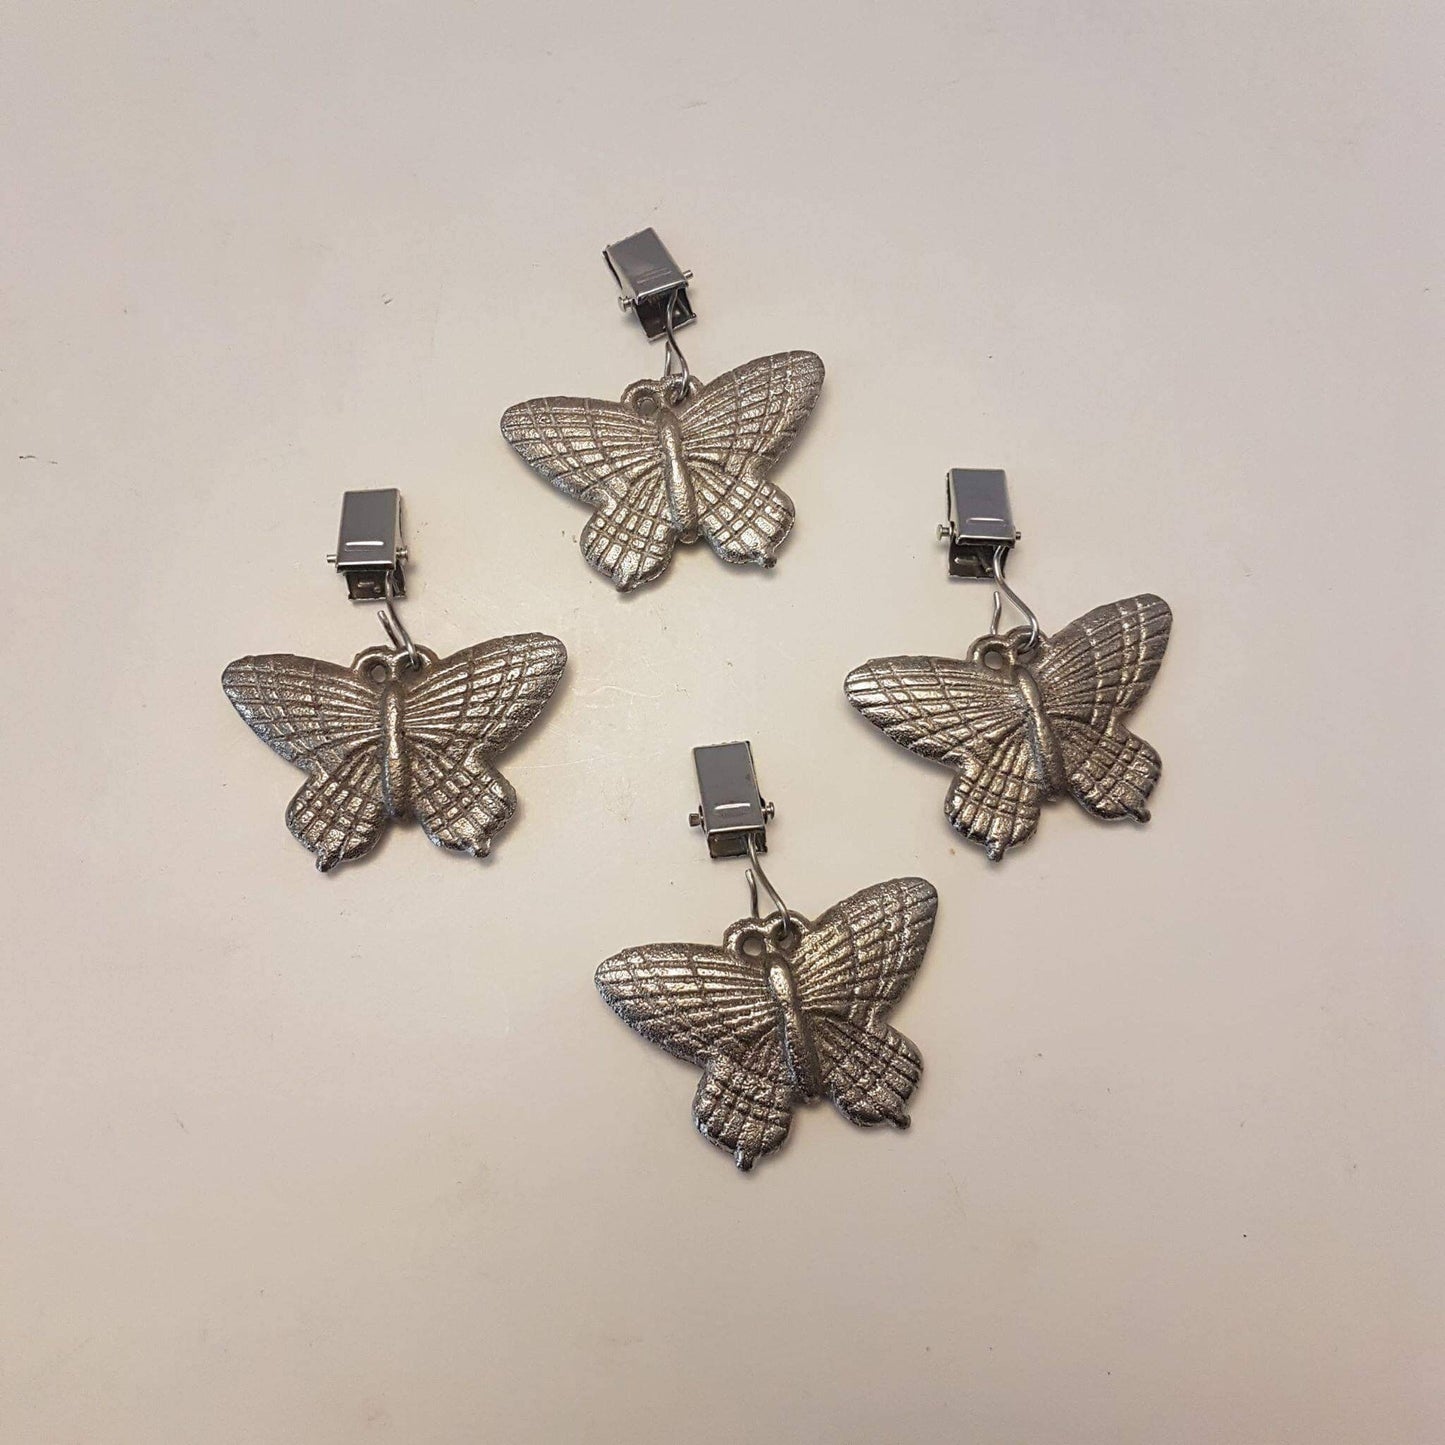 tablecloth weights patio table weights butterflies